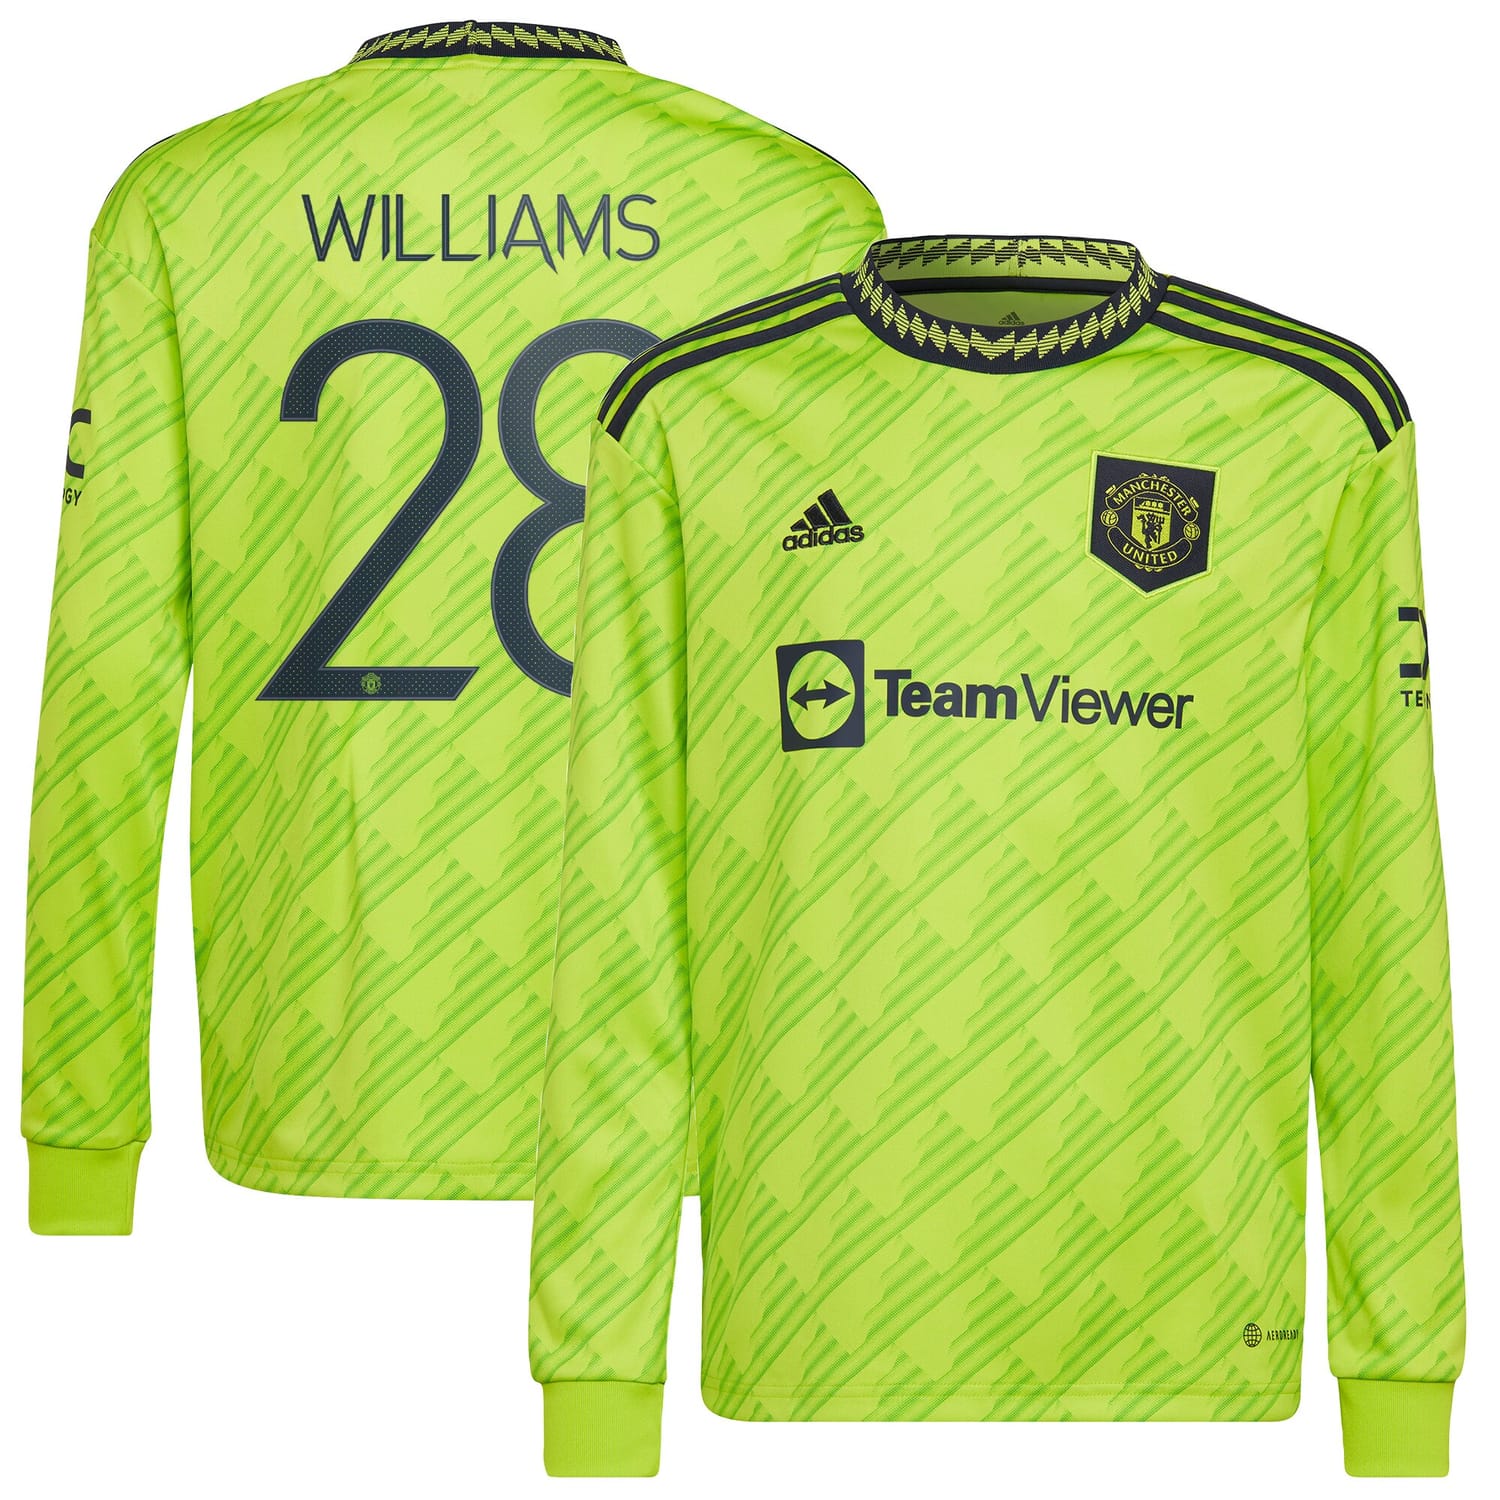 Premier League Manchester United Third Cup Jersey Shirt Long Sleeve 2022-23 player Rachel Williams 28 printing for Men